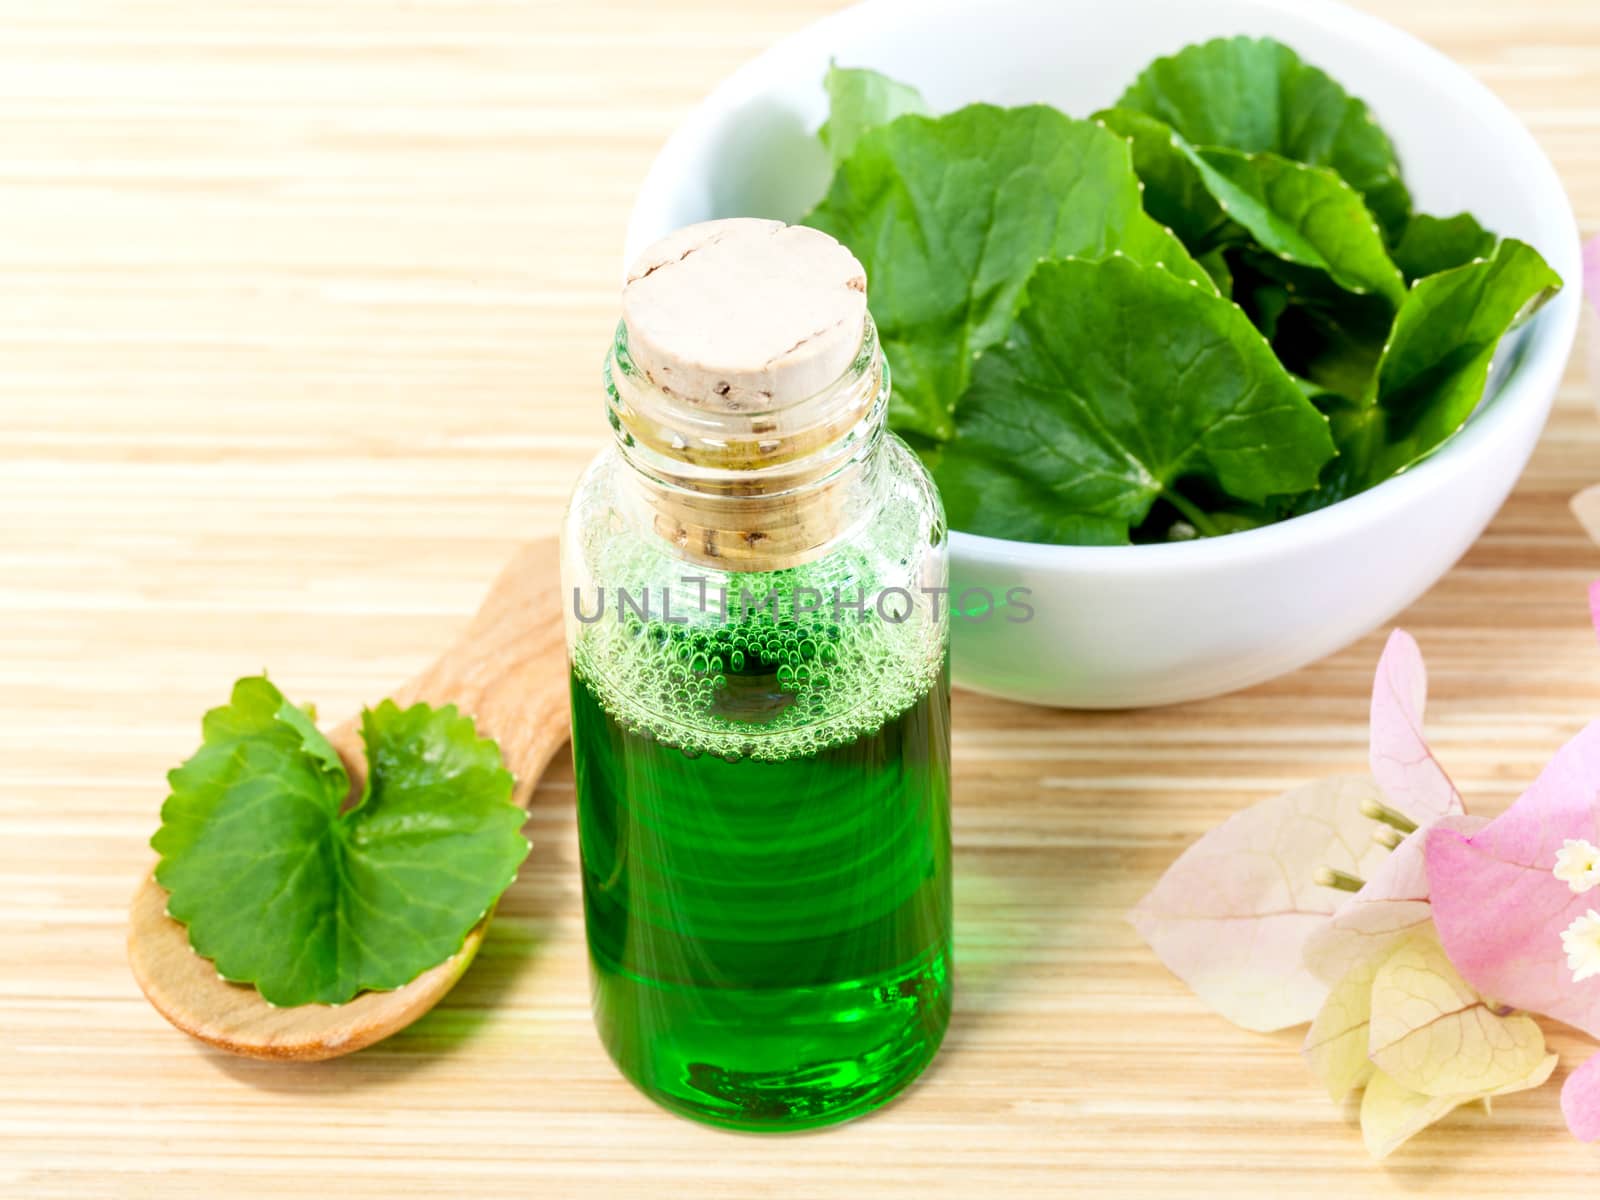 Natural Spa Ingredients . - Centella asiatica  Urban, Asiatic Pennywort  for skin care.